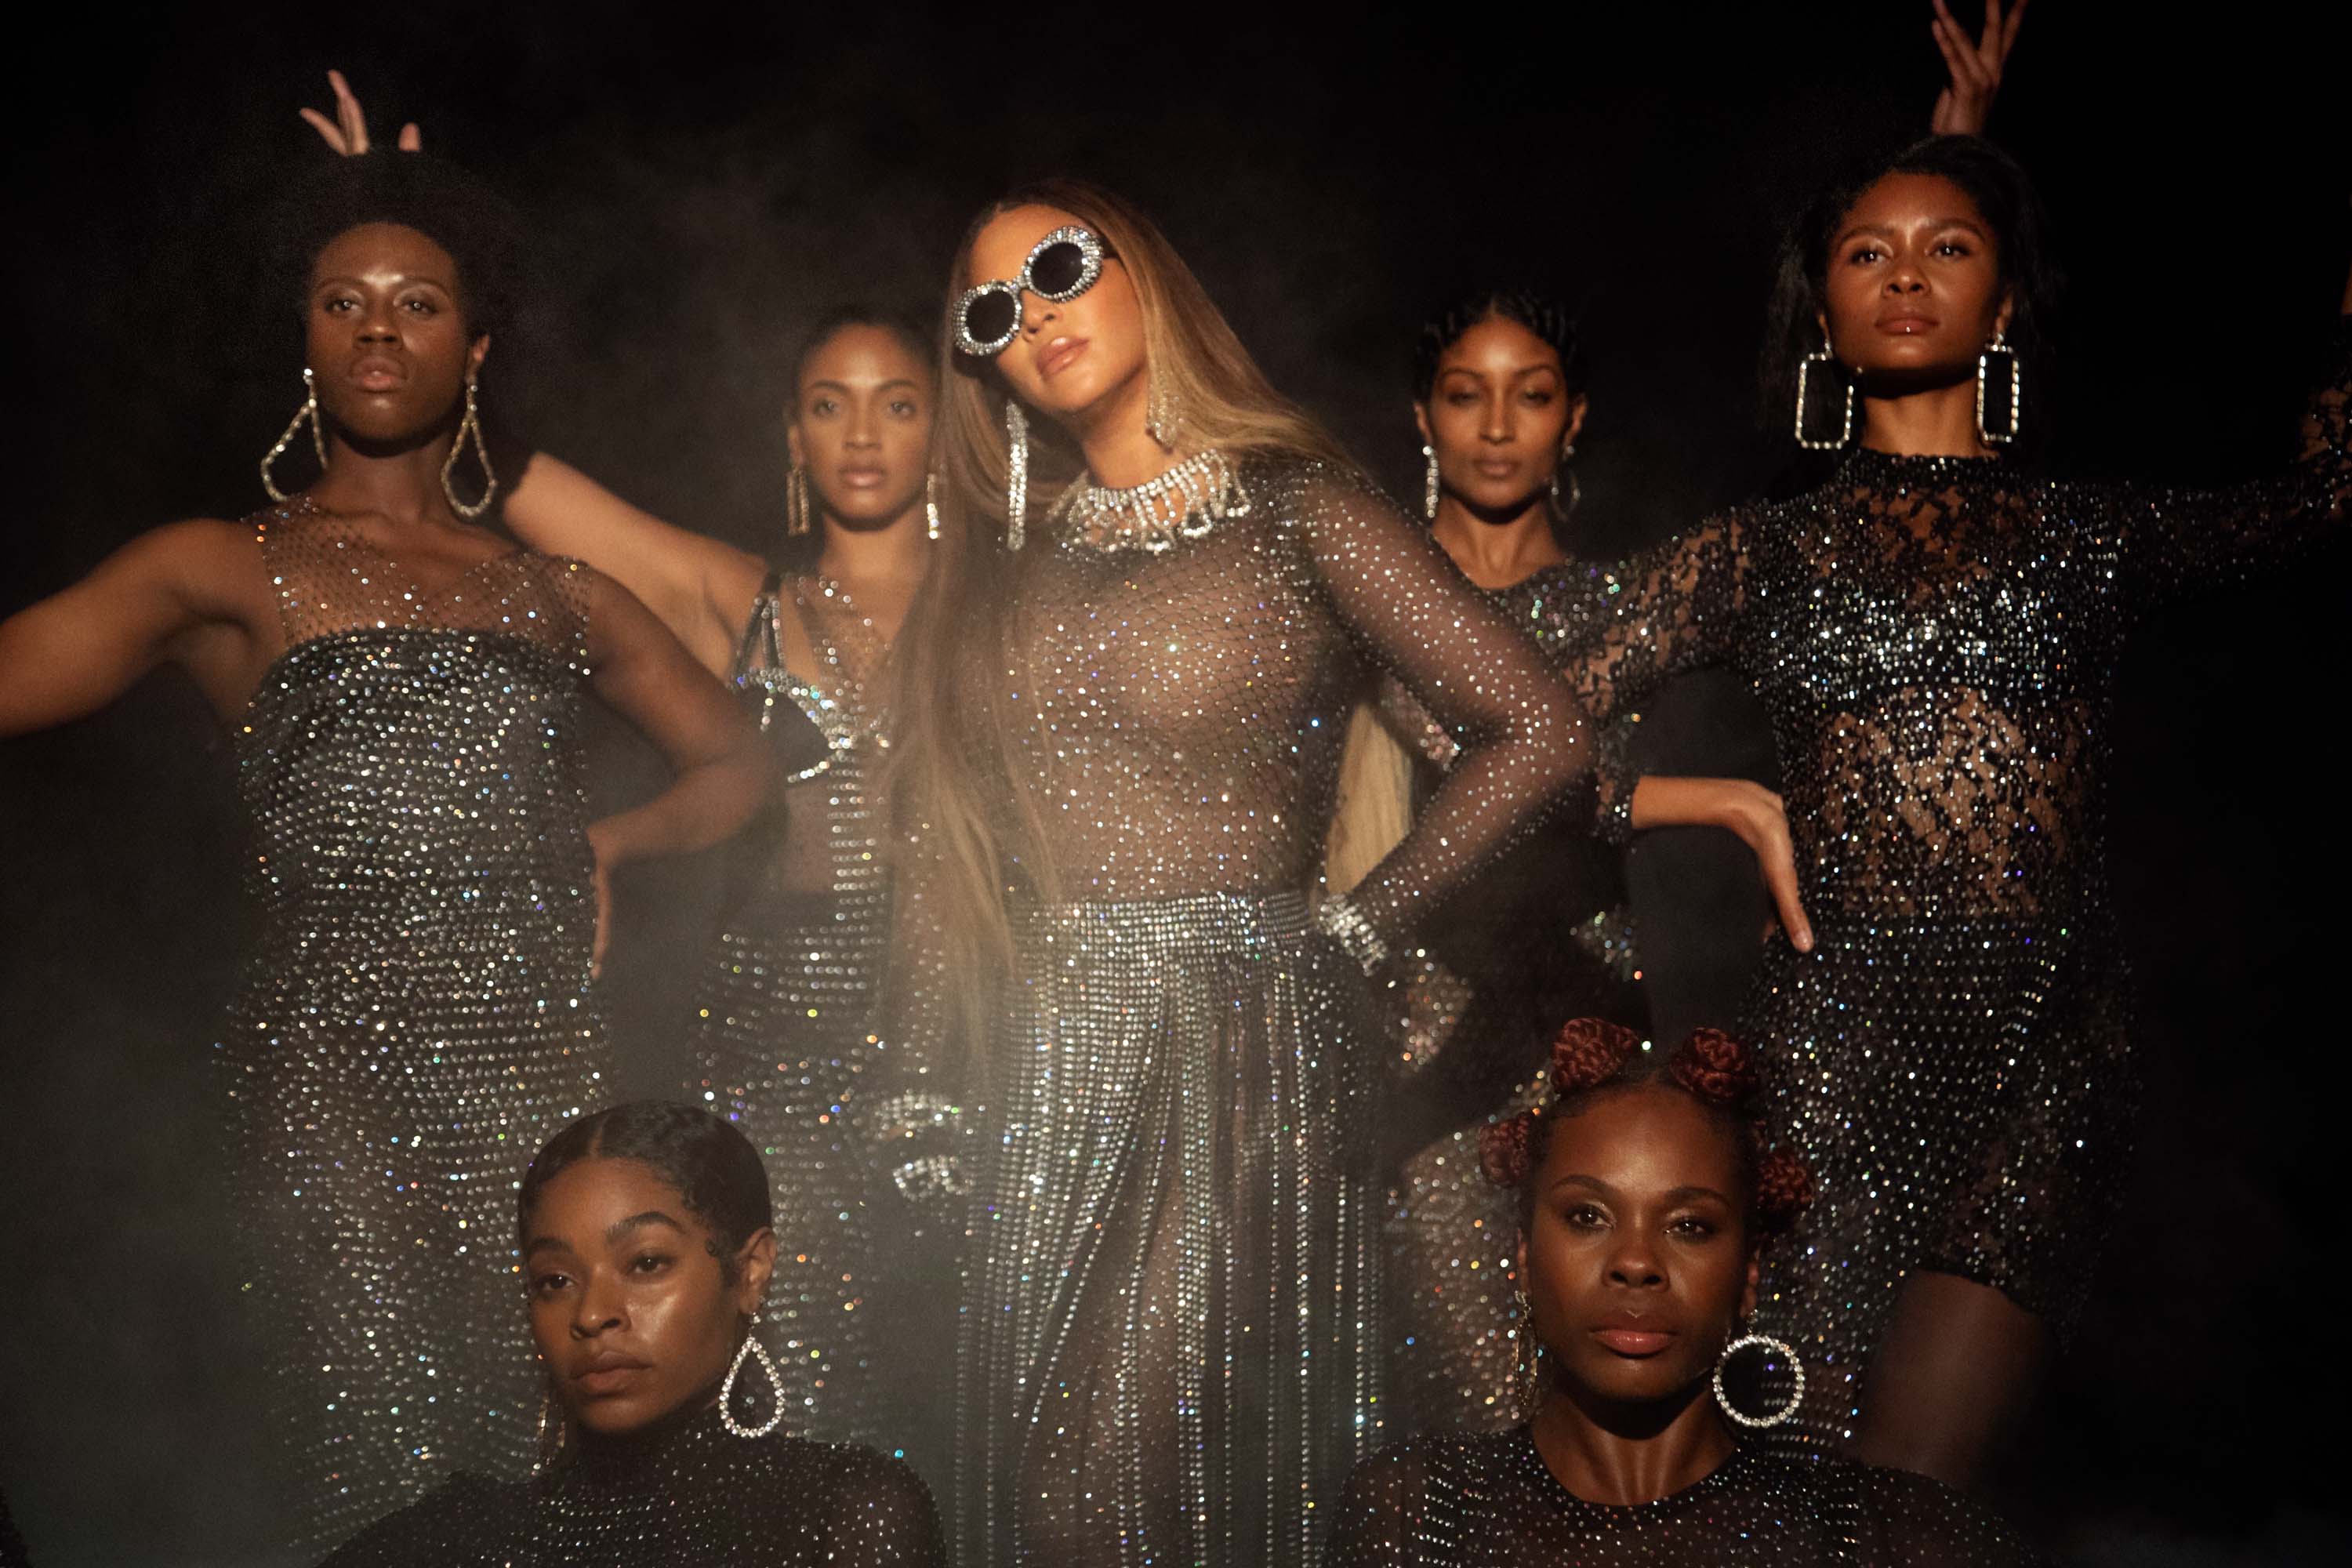 Black Is King': Beyoncé's visual album is a feast of fashion and symbolism